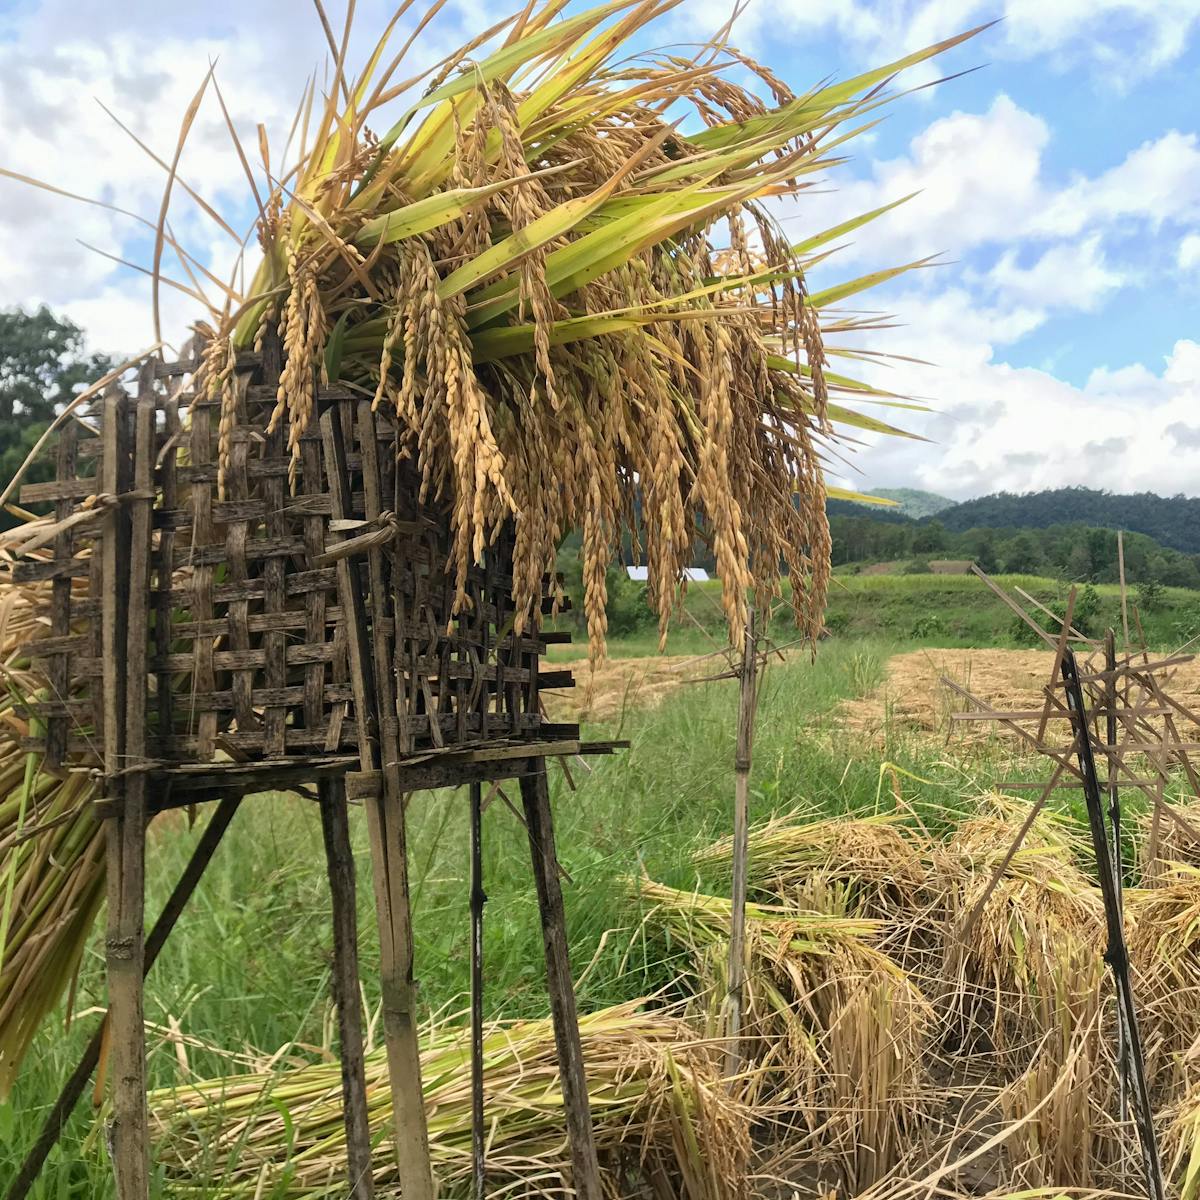 A colour photograph of a crop field in Thailand with green hills and blue skies. In the foreground there is a a wooden structure holding harvested crops. Next to this are a series of wooden crosses staked in the ground.